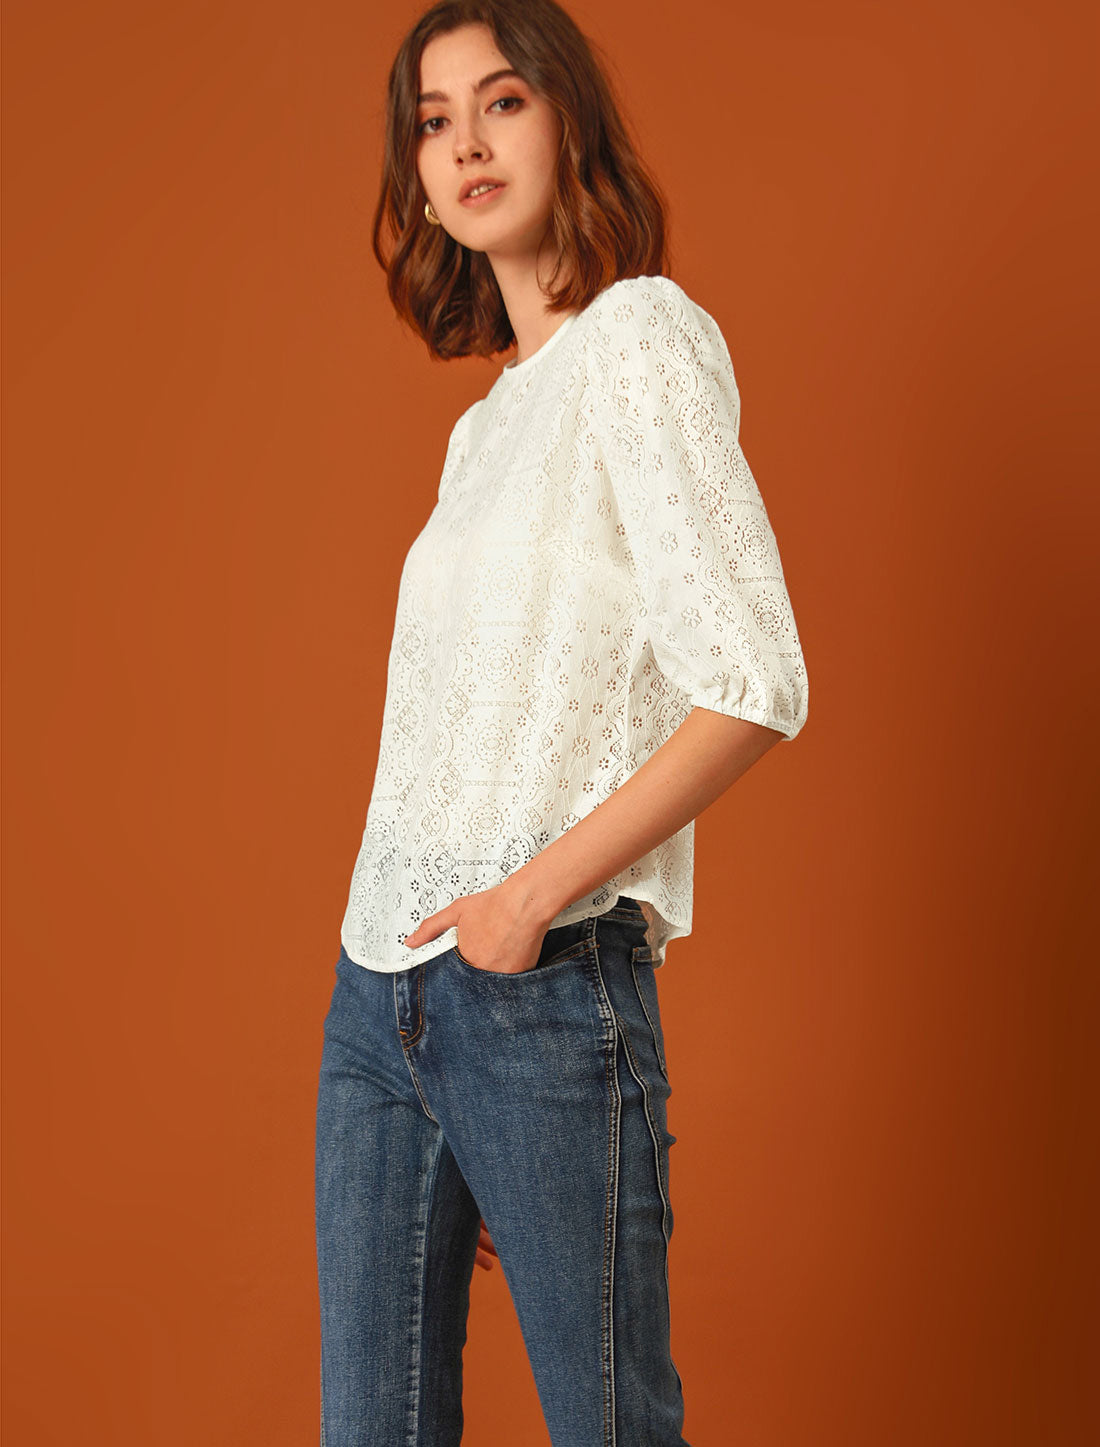 Allegra K Sheer Puff Sleeve Retro Embroidery Tops Lace Blouse